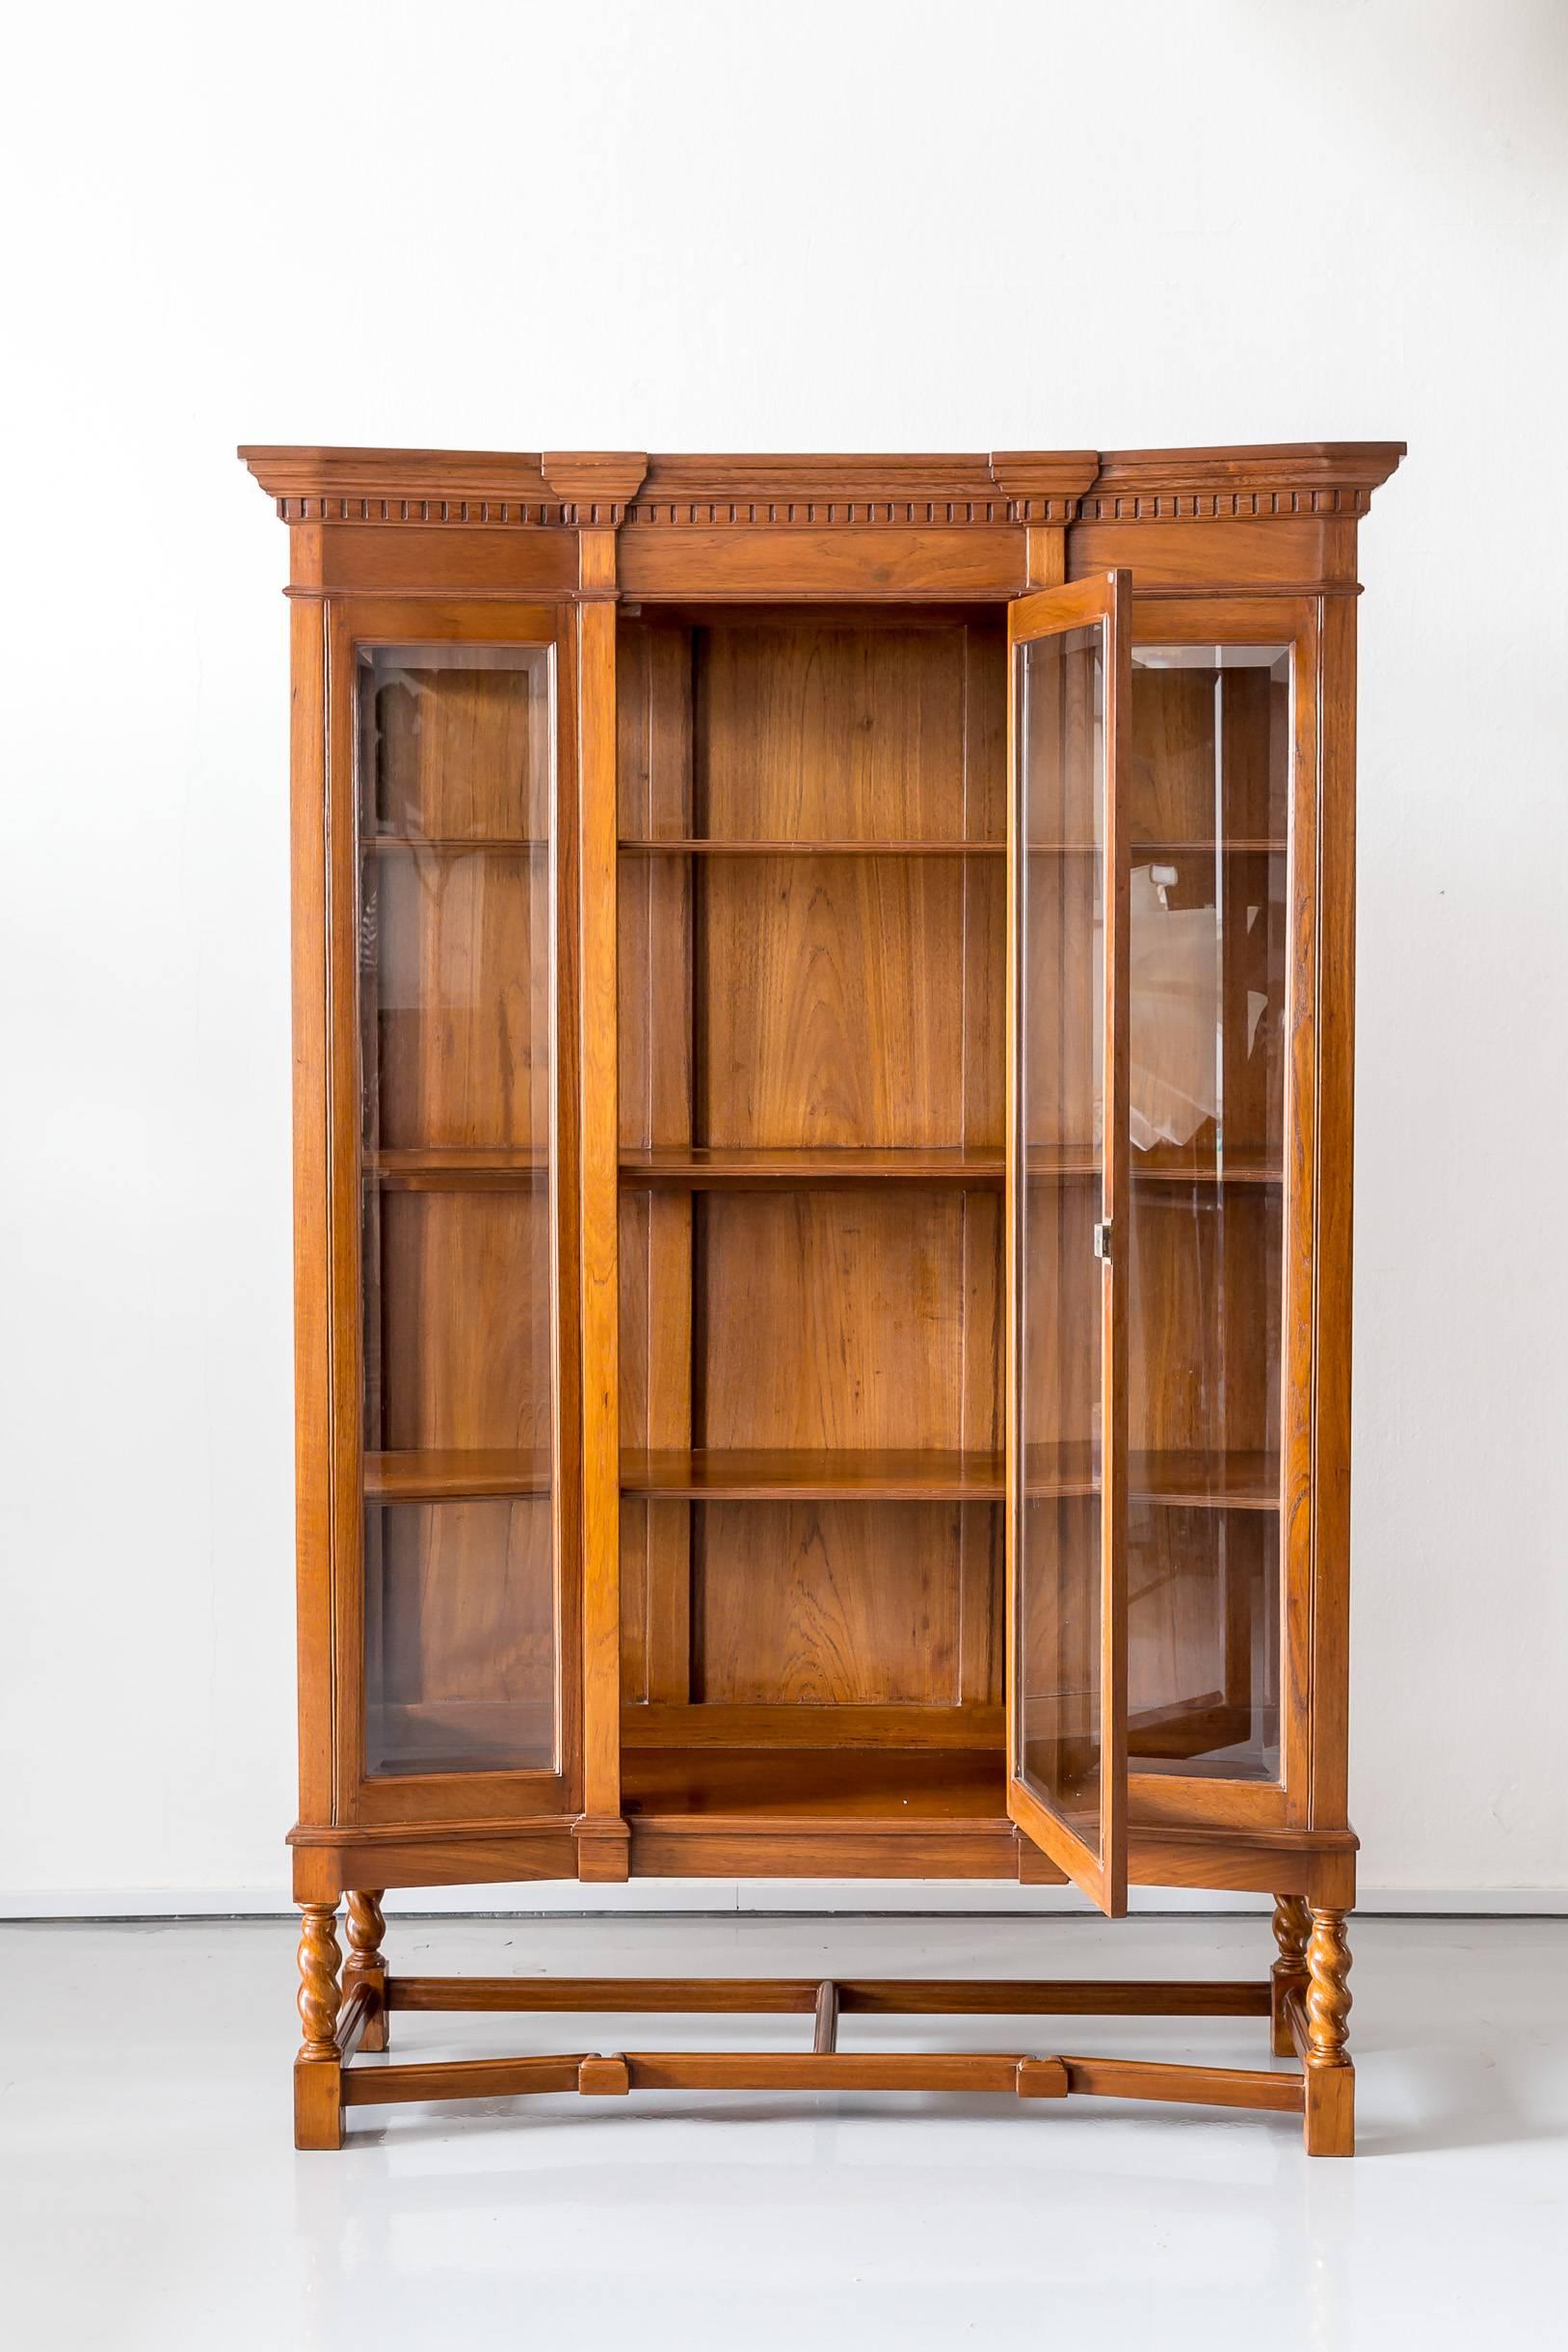 Antique Anglo-Indian or British Colonial Teak Wood Display Cabinet For Sale 1